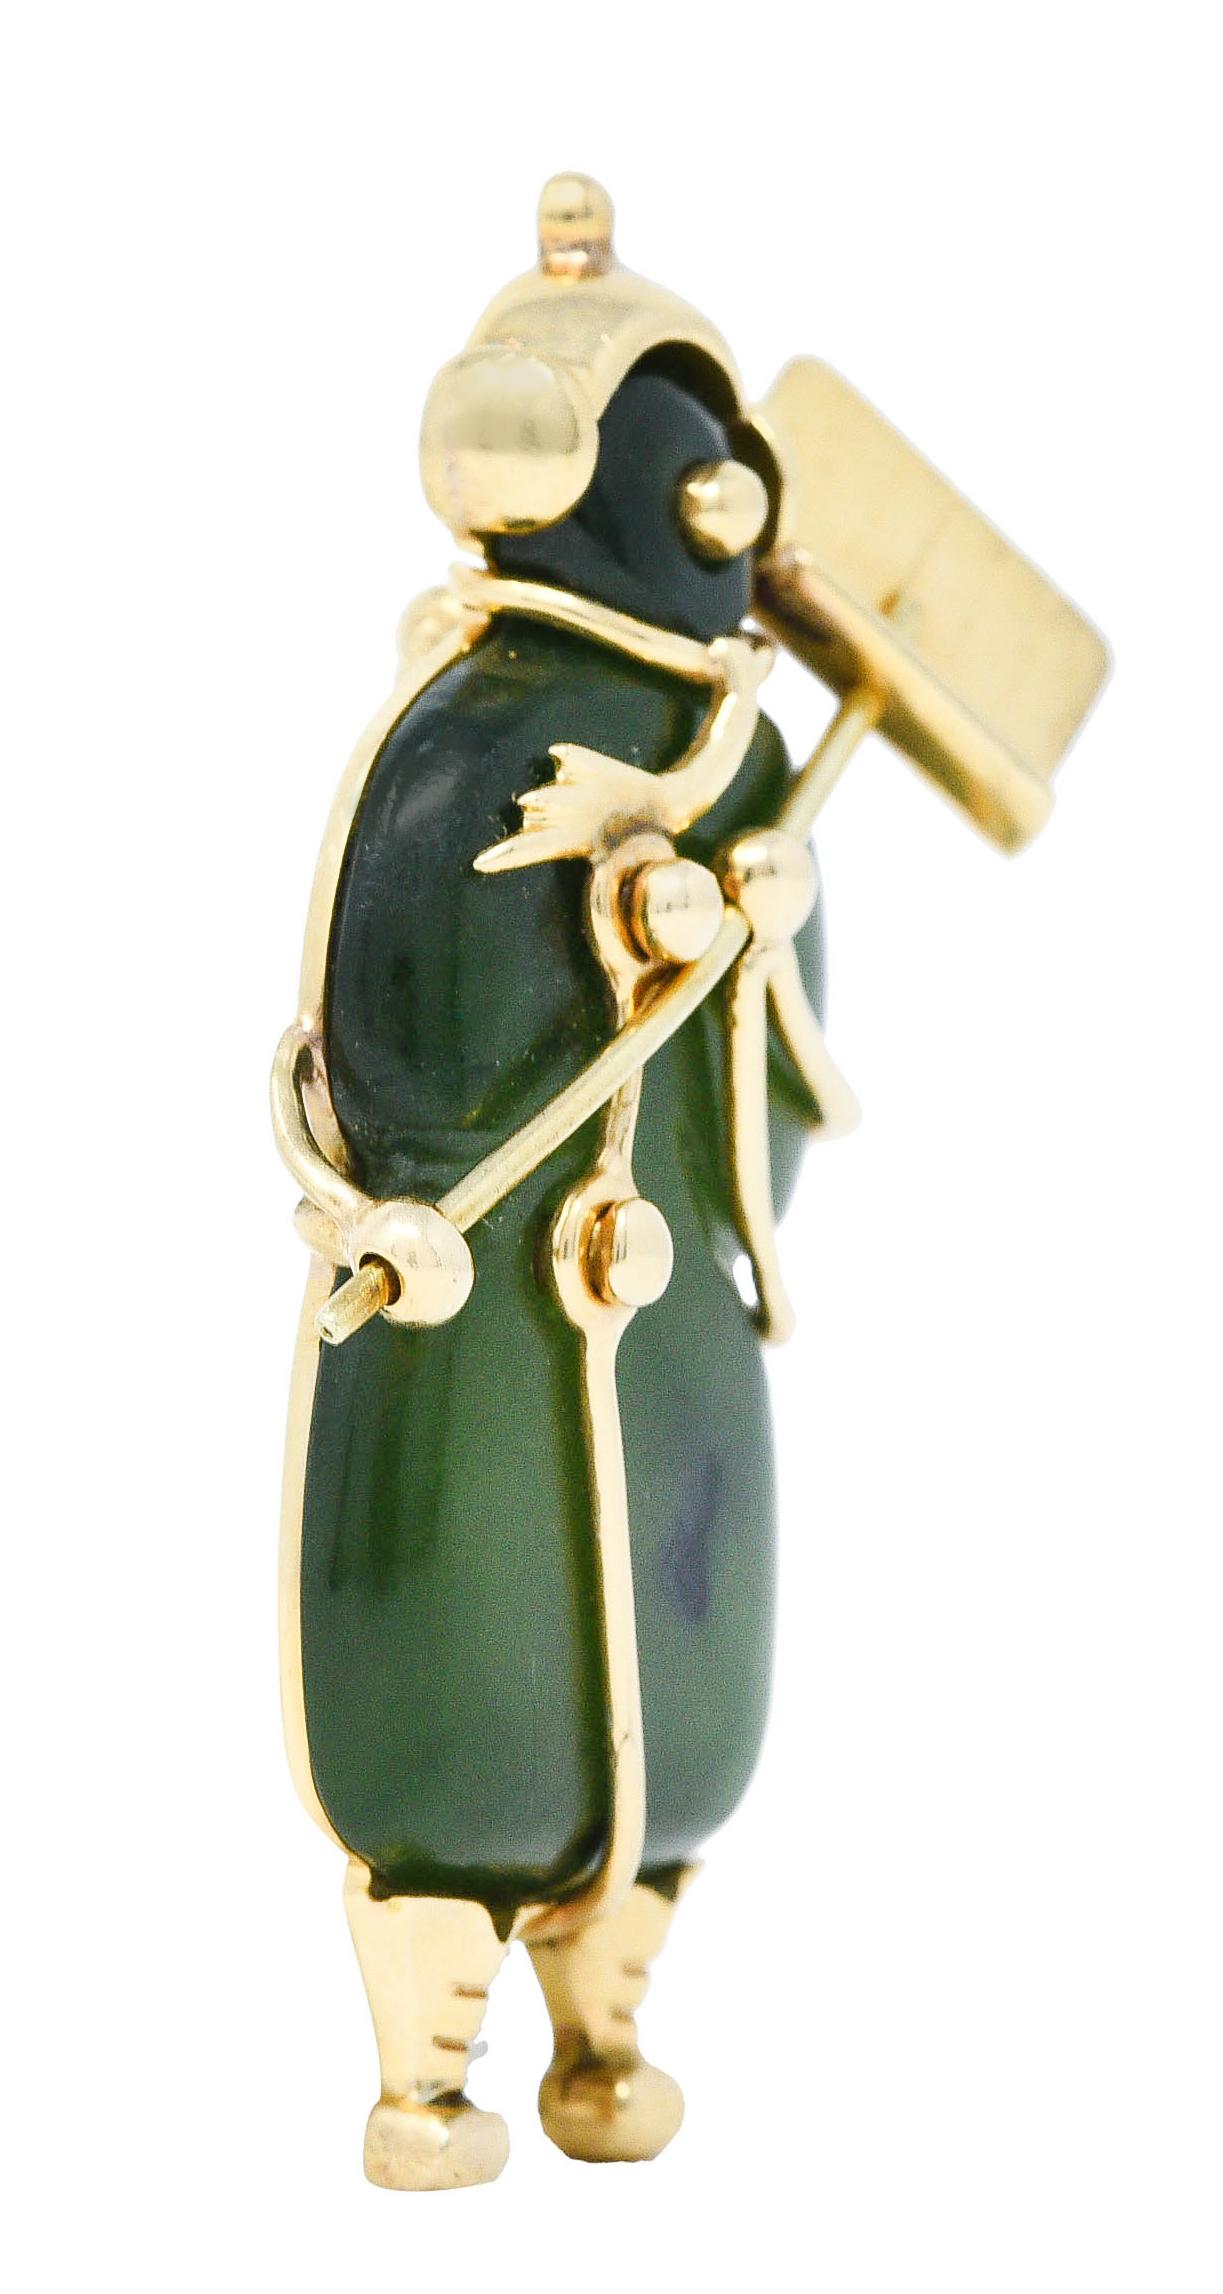 Brooch is comprised of beautifully carved nephrite jade
Translucent green mottled with black in some areas

With a stylized polished gold frame that depicts an earmuffed snowman holding a snow shovel

Completed by a pin stem with locking